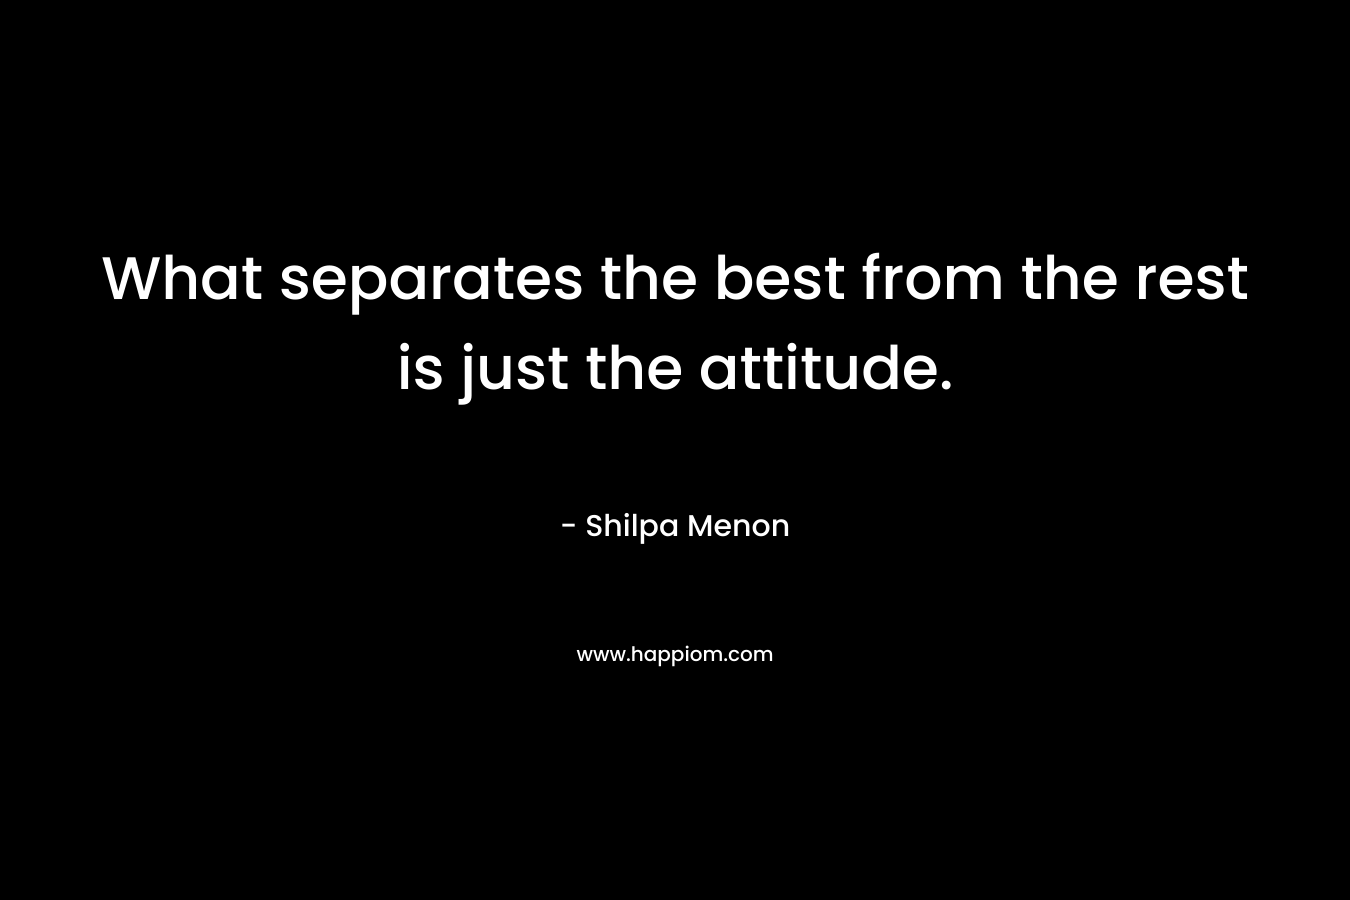 What separates the best from the rest is just the attitude.